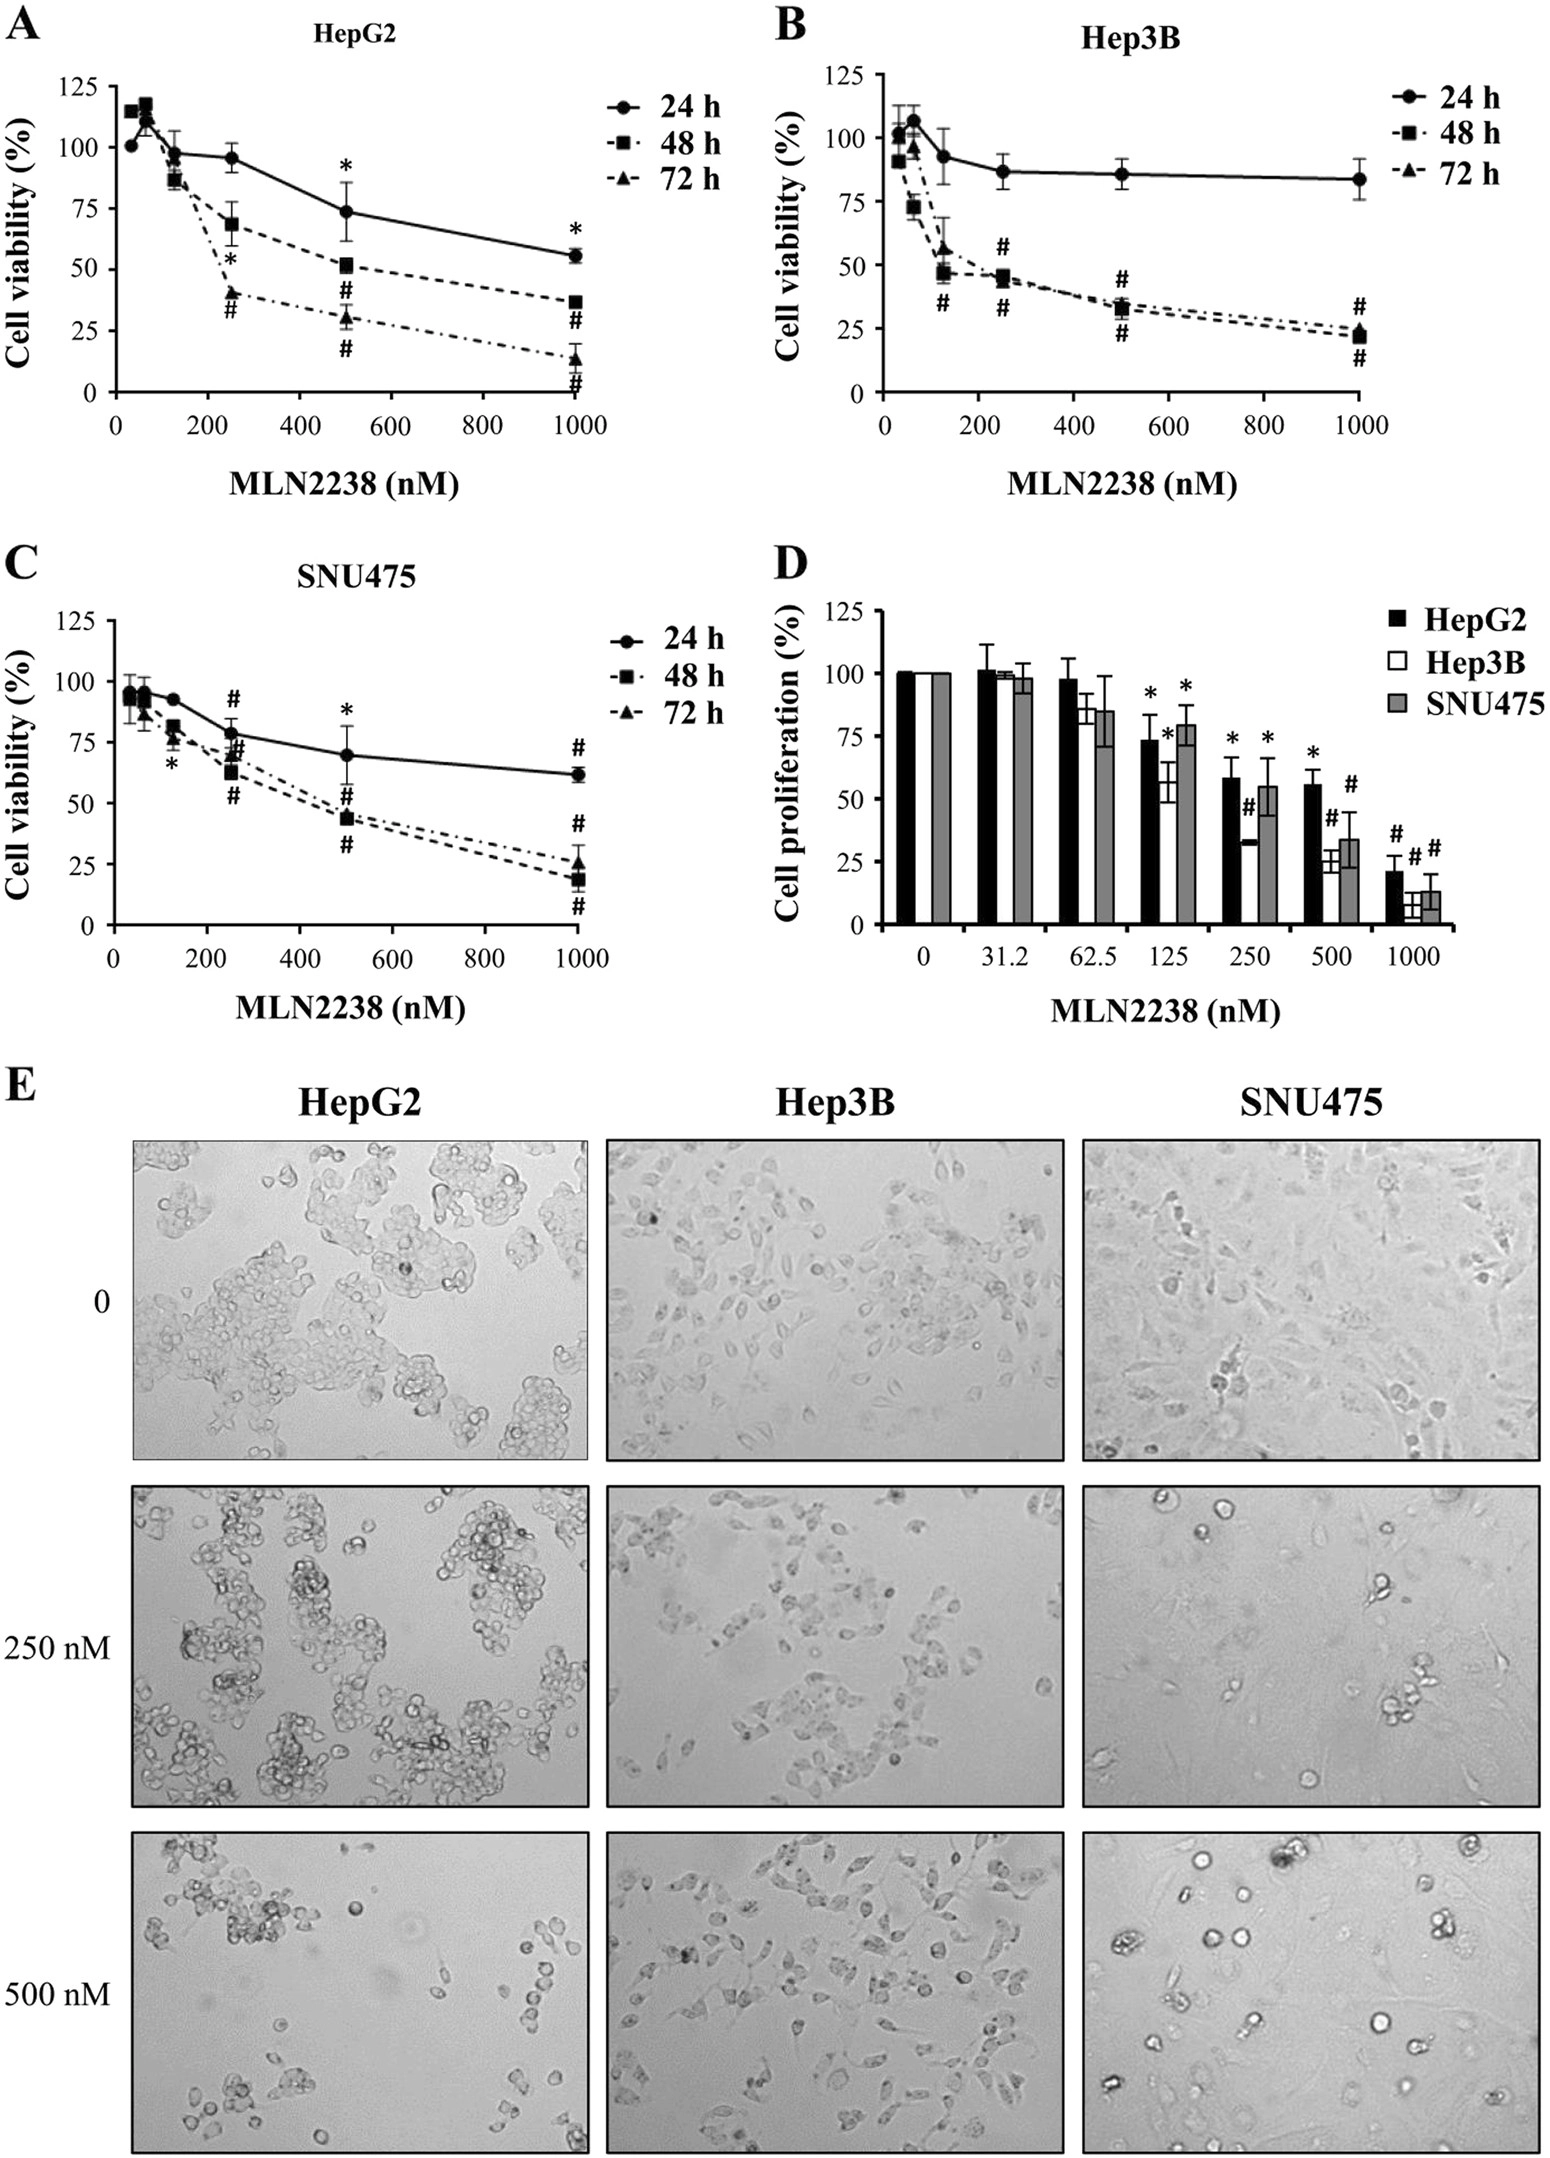 Preclinical evaluation of antitumor activity of the proteasome inhibitor MLN2238 (ixazomib) in hepatocellular carcinoma cells